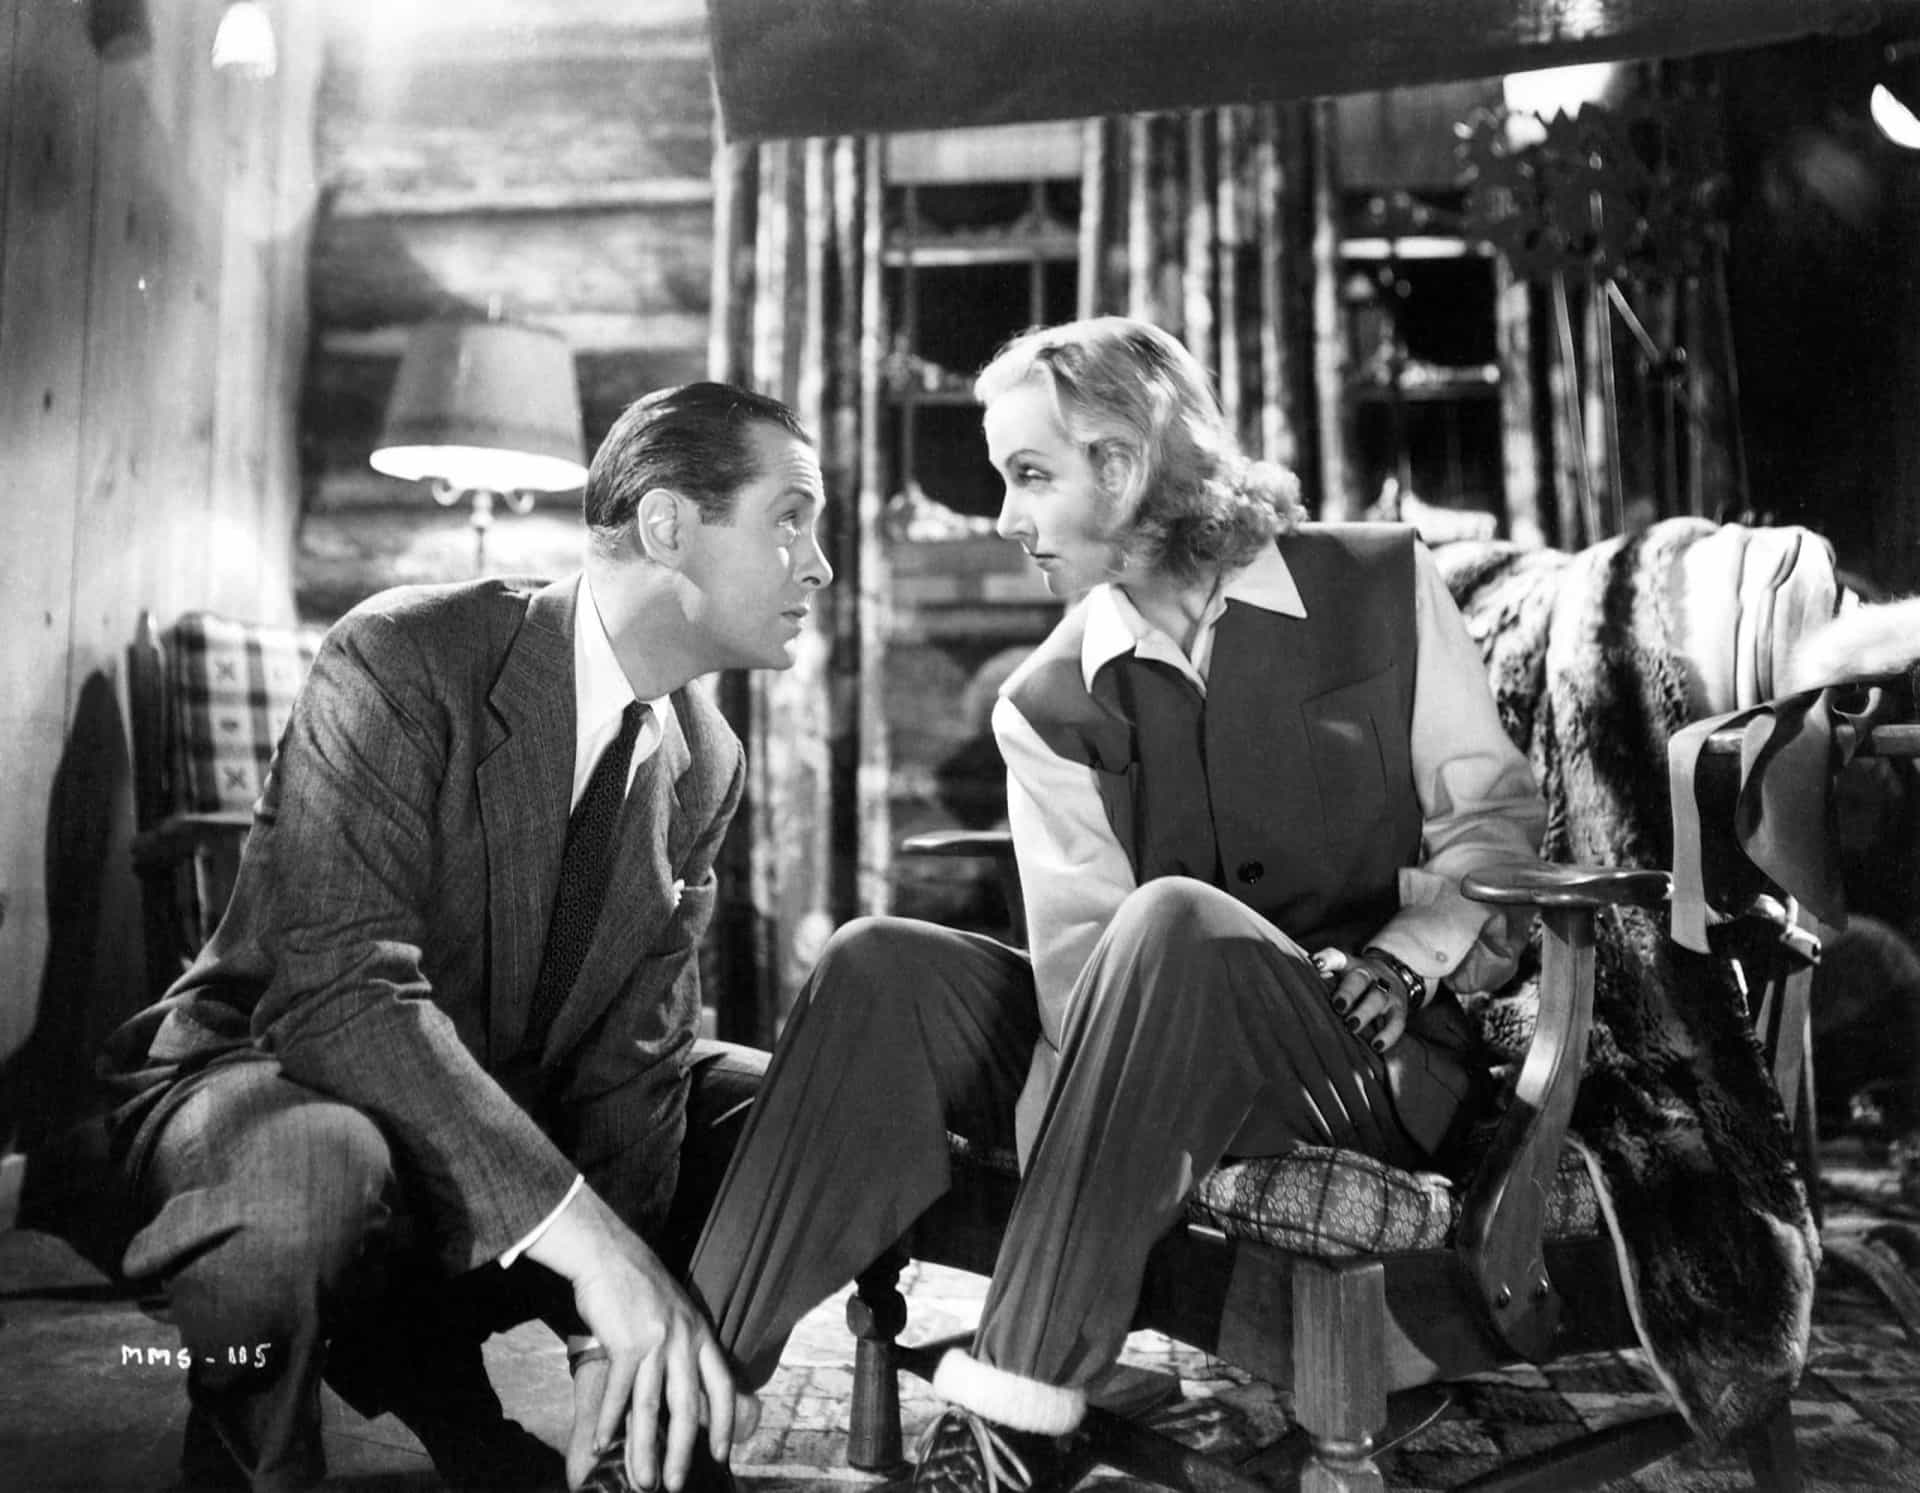 <p>Alfred Hitchcock directed this movie starring Carole Lombard and Robert Montgomery. The movie is about a couple who have been together for three years and find out that their marriage is not legally valid.</p><p><a href="https://www.msn.com/en-us/community/channel/vid-7xx8mnucu55yw63we9va2gwr7uihbxwc68fxqp25x6tg4ftibpra?cvid=94631541bc0f4f89bfd59158d696ad7e">Follow us and access great exclusive content everyday</a></p>